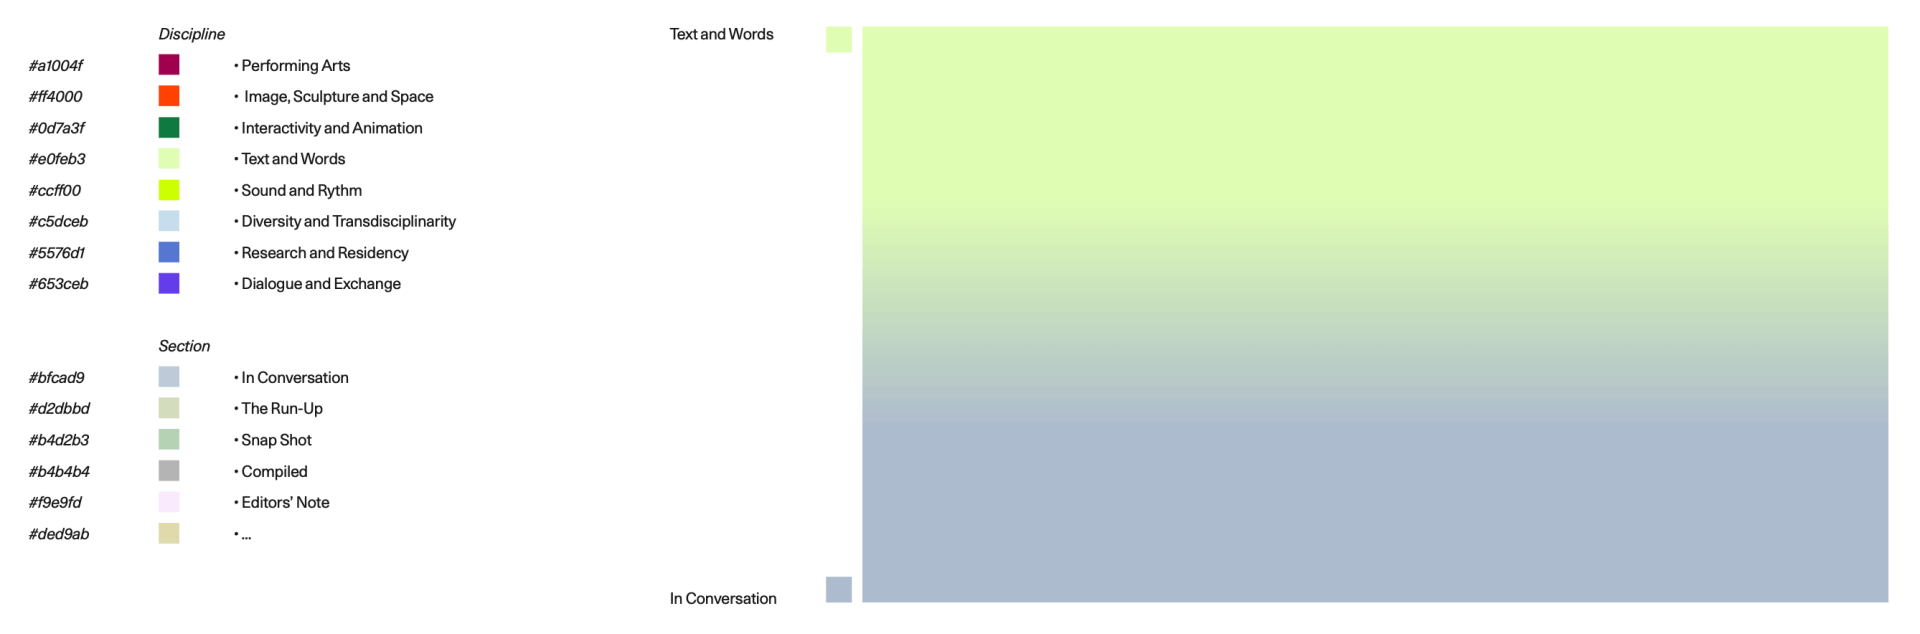 Various Artists - Allocation of Colors